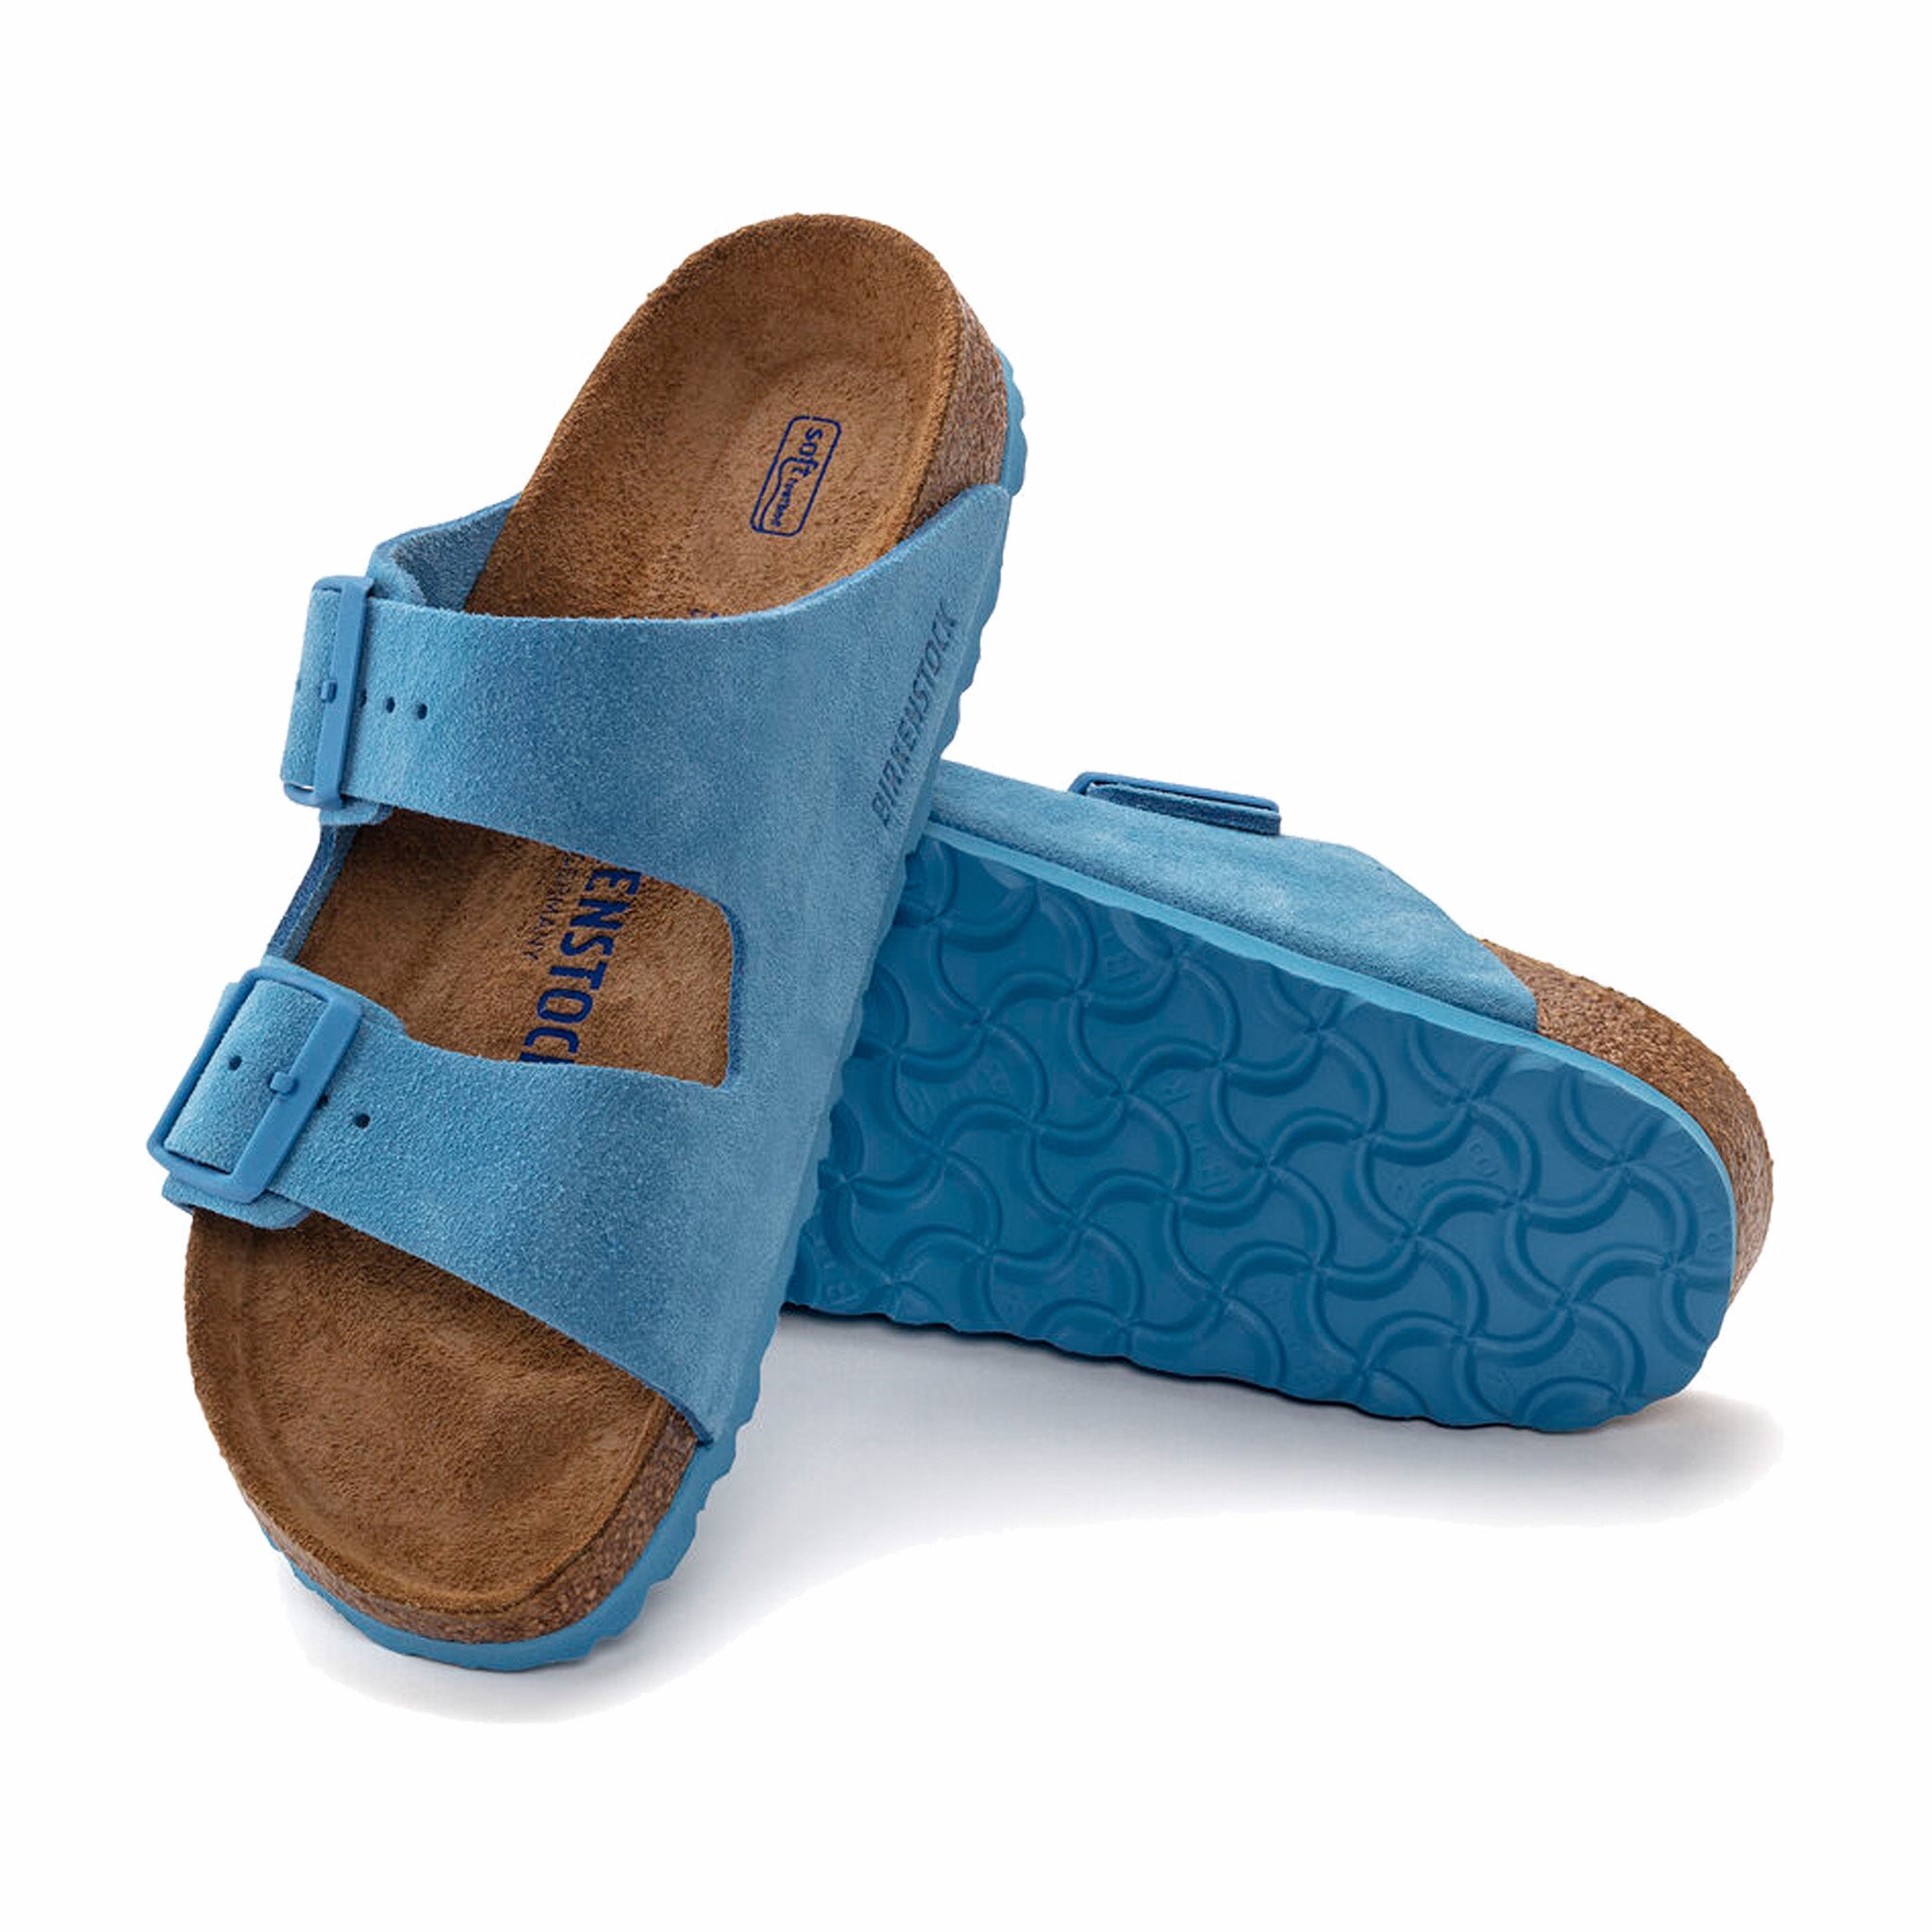 Arizona Soft Footbed Suede Leather Mink